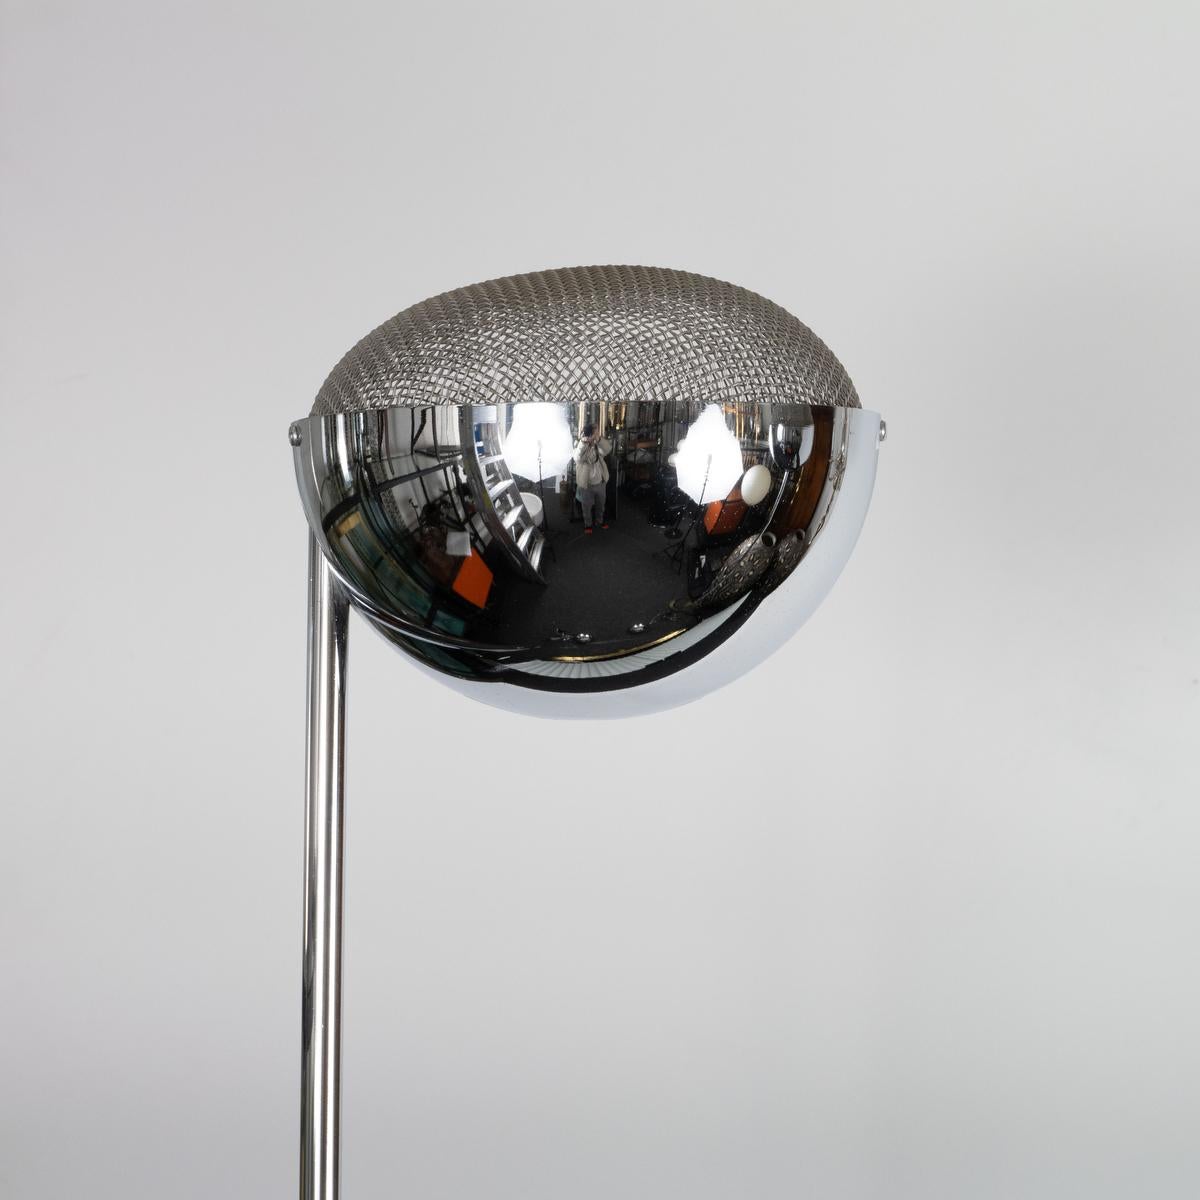 Pair of modernist floor lamps by George Kovacs In Good Condition For Sale In Tarrytown, NY